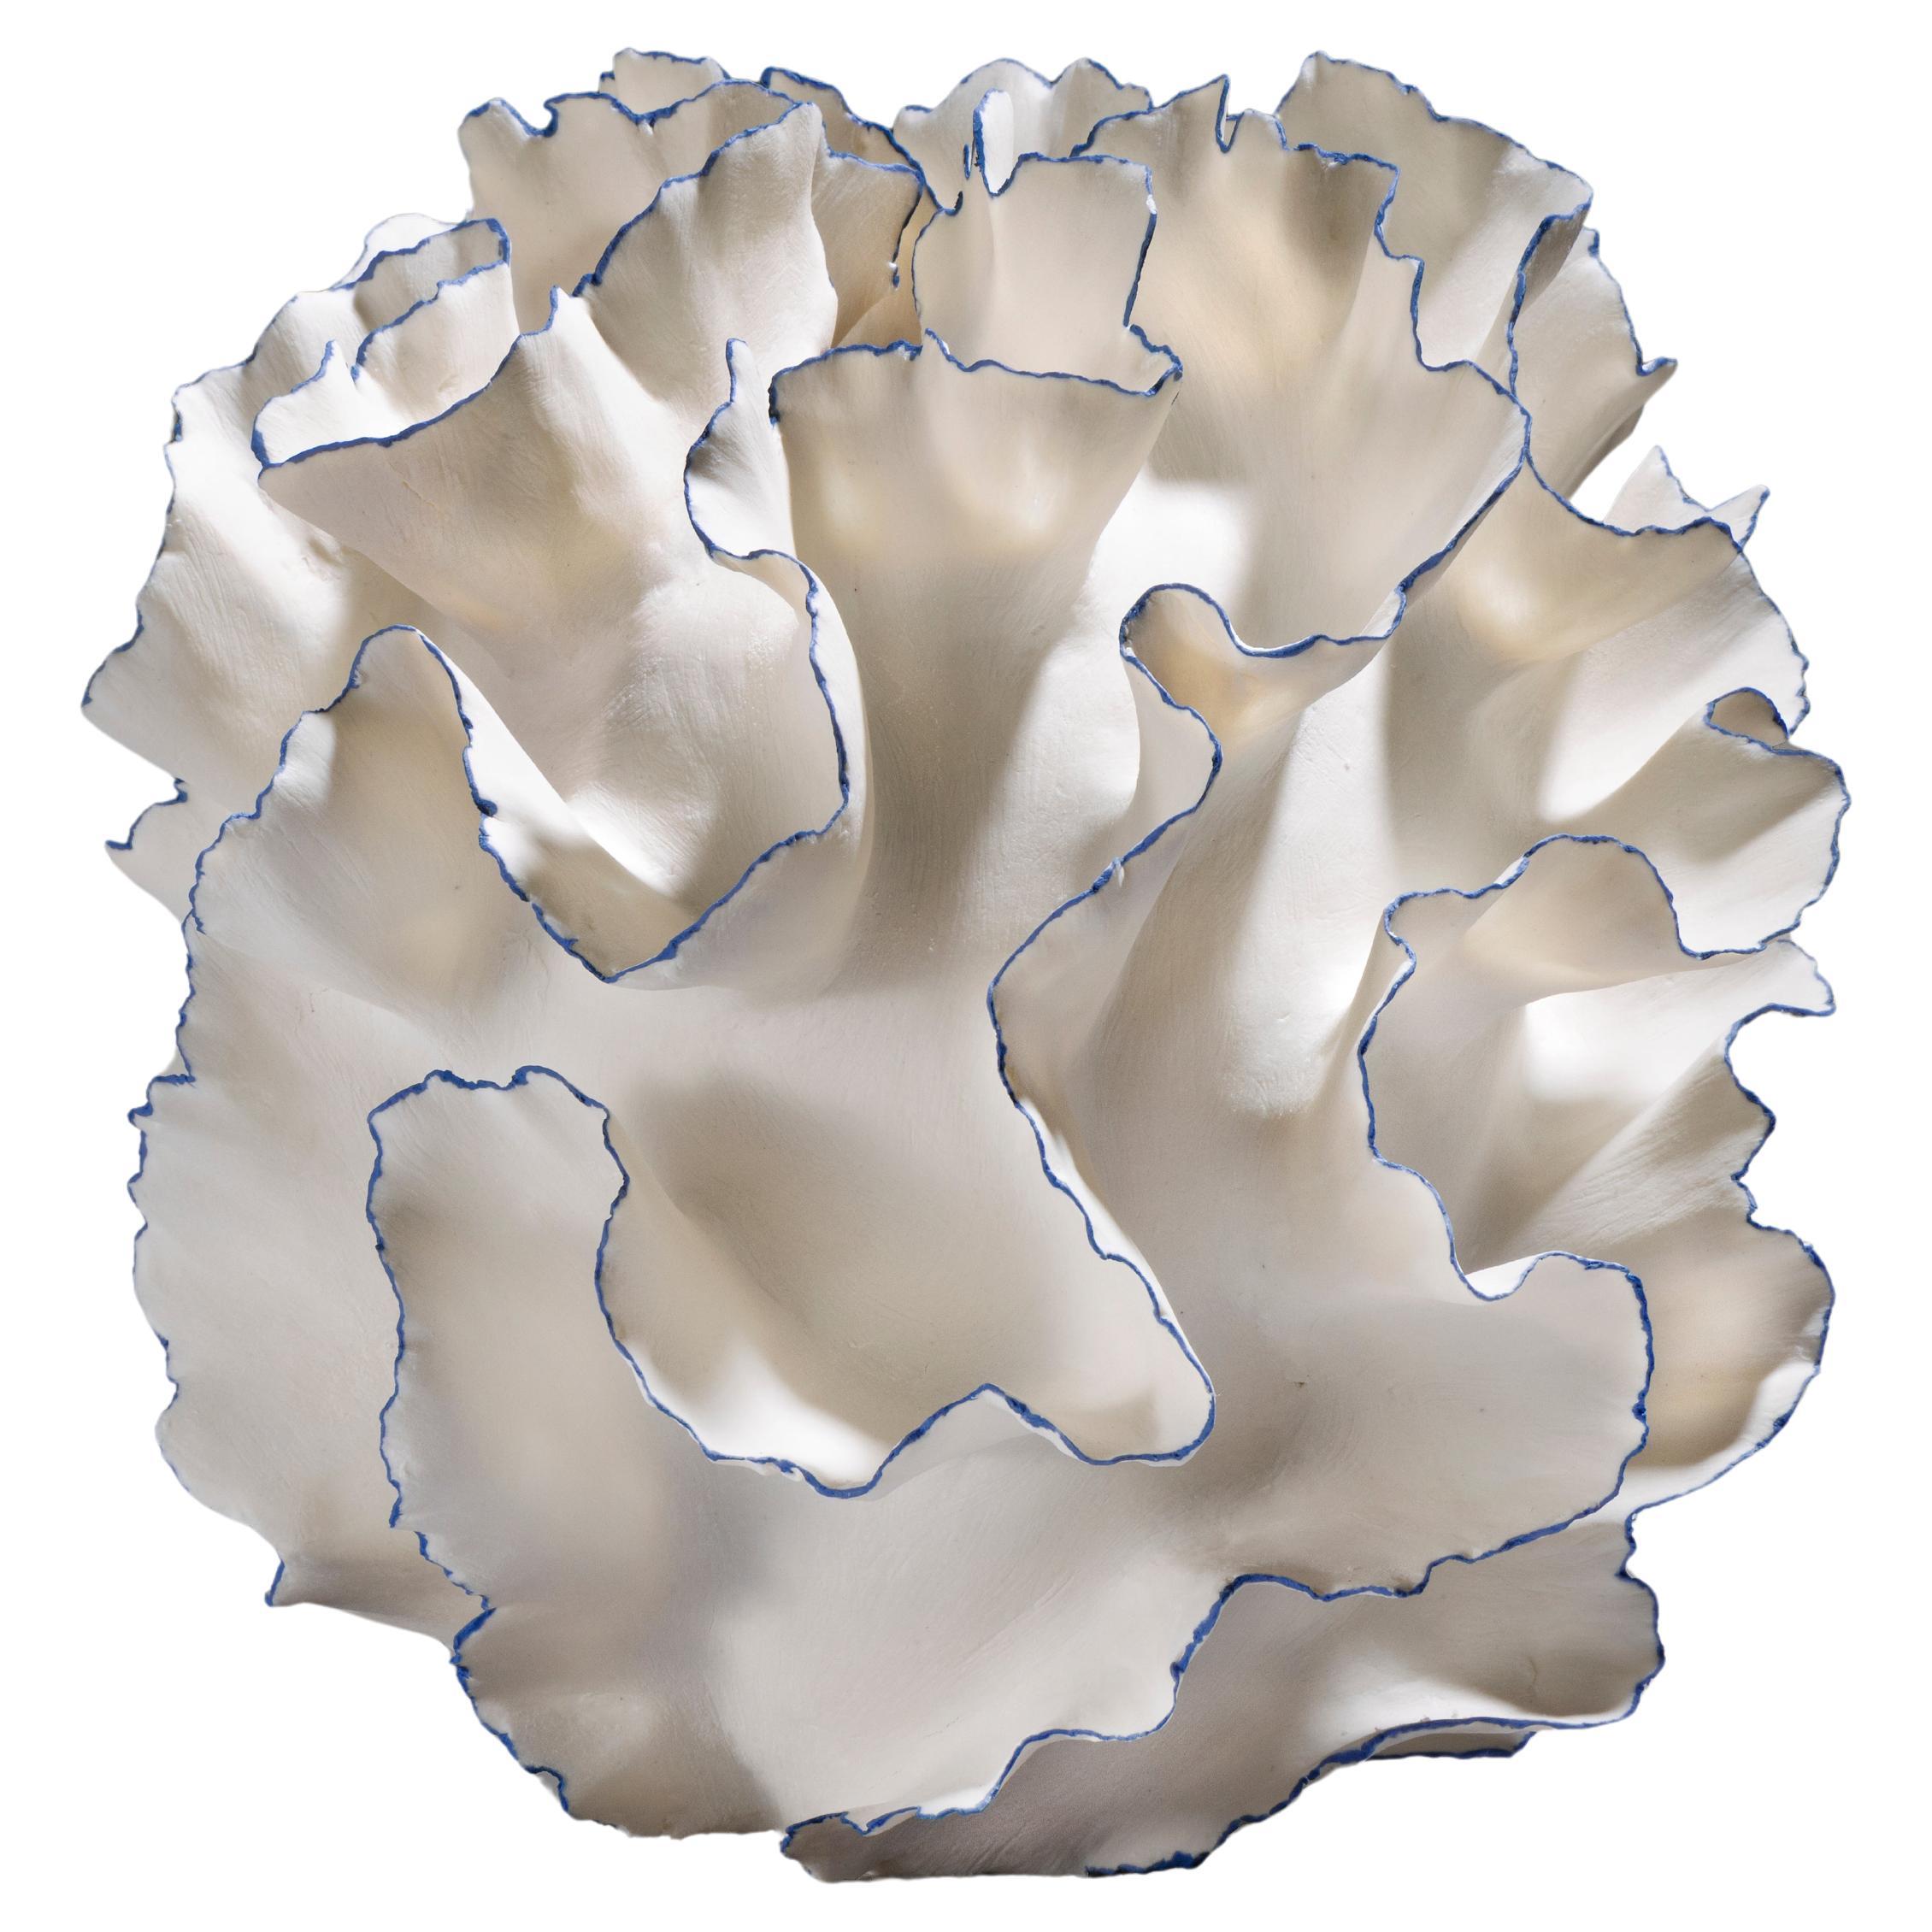 Abstract White and Blue Ruffled Sculpture, Sandra Davolio